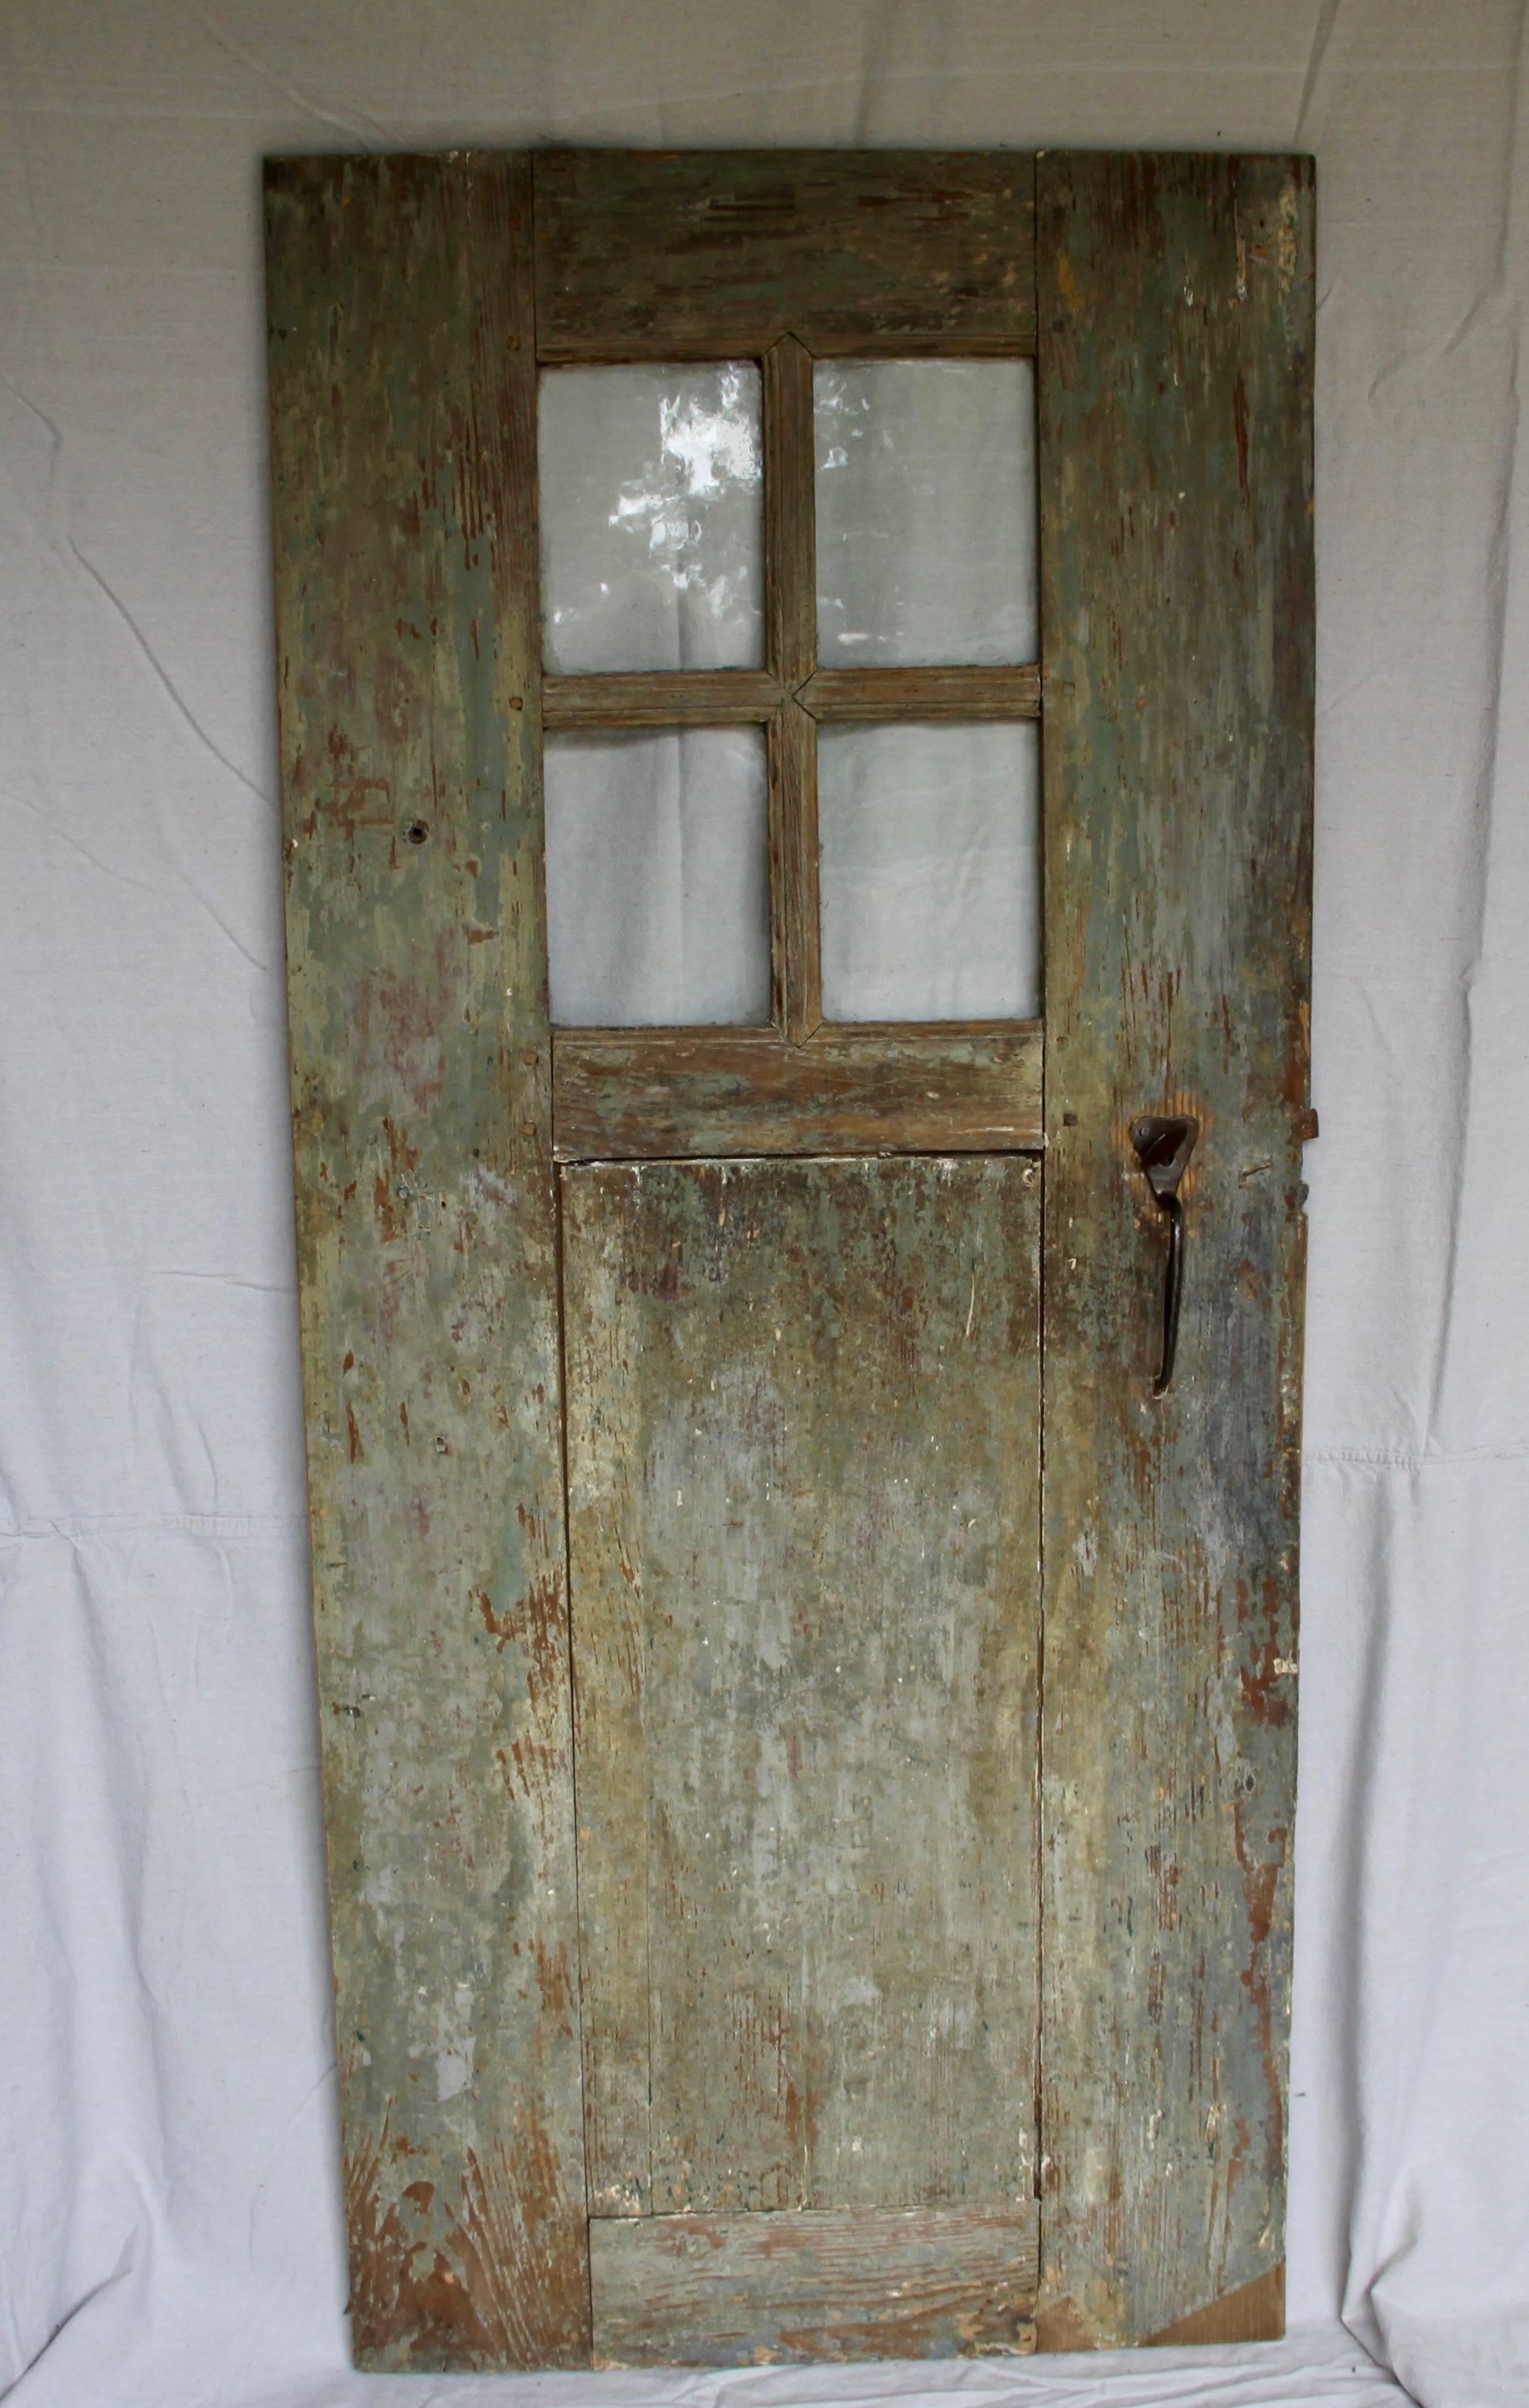 Utterly charming and curious, a very old door of unusual size. Handcrafted and retaining traces of the original green paint and iron thumb latch hardware, it's unusual size and beautiful wavy glass give this door a magical quality.